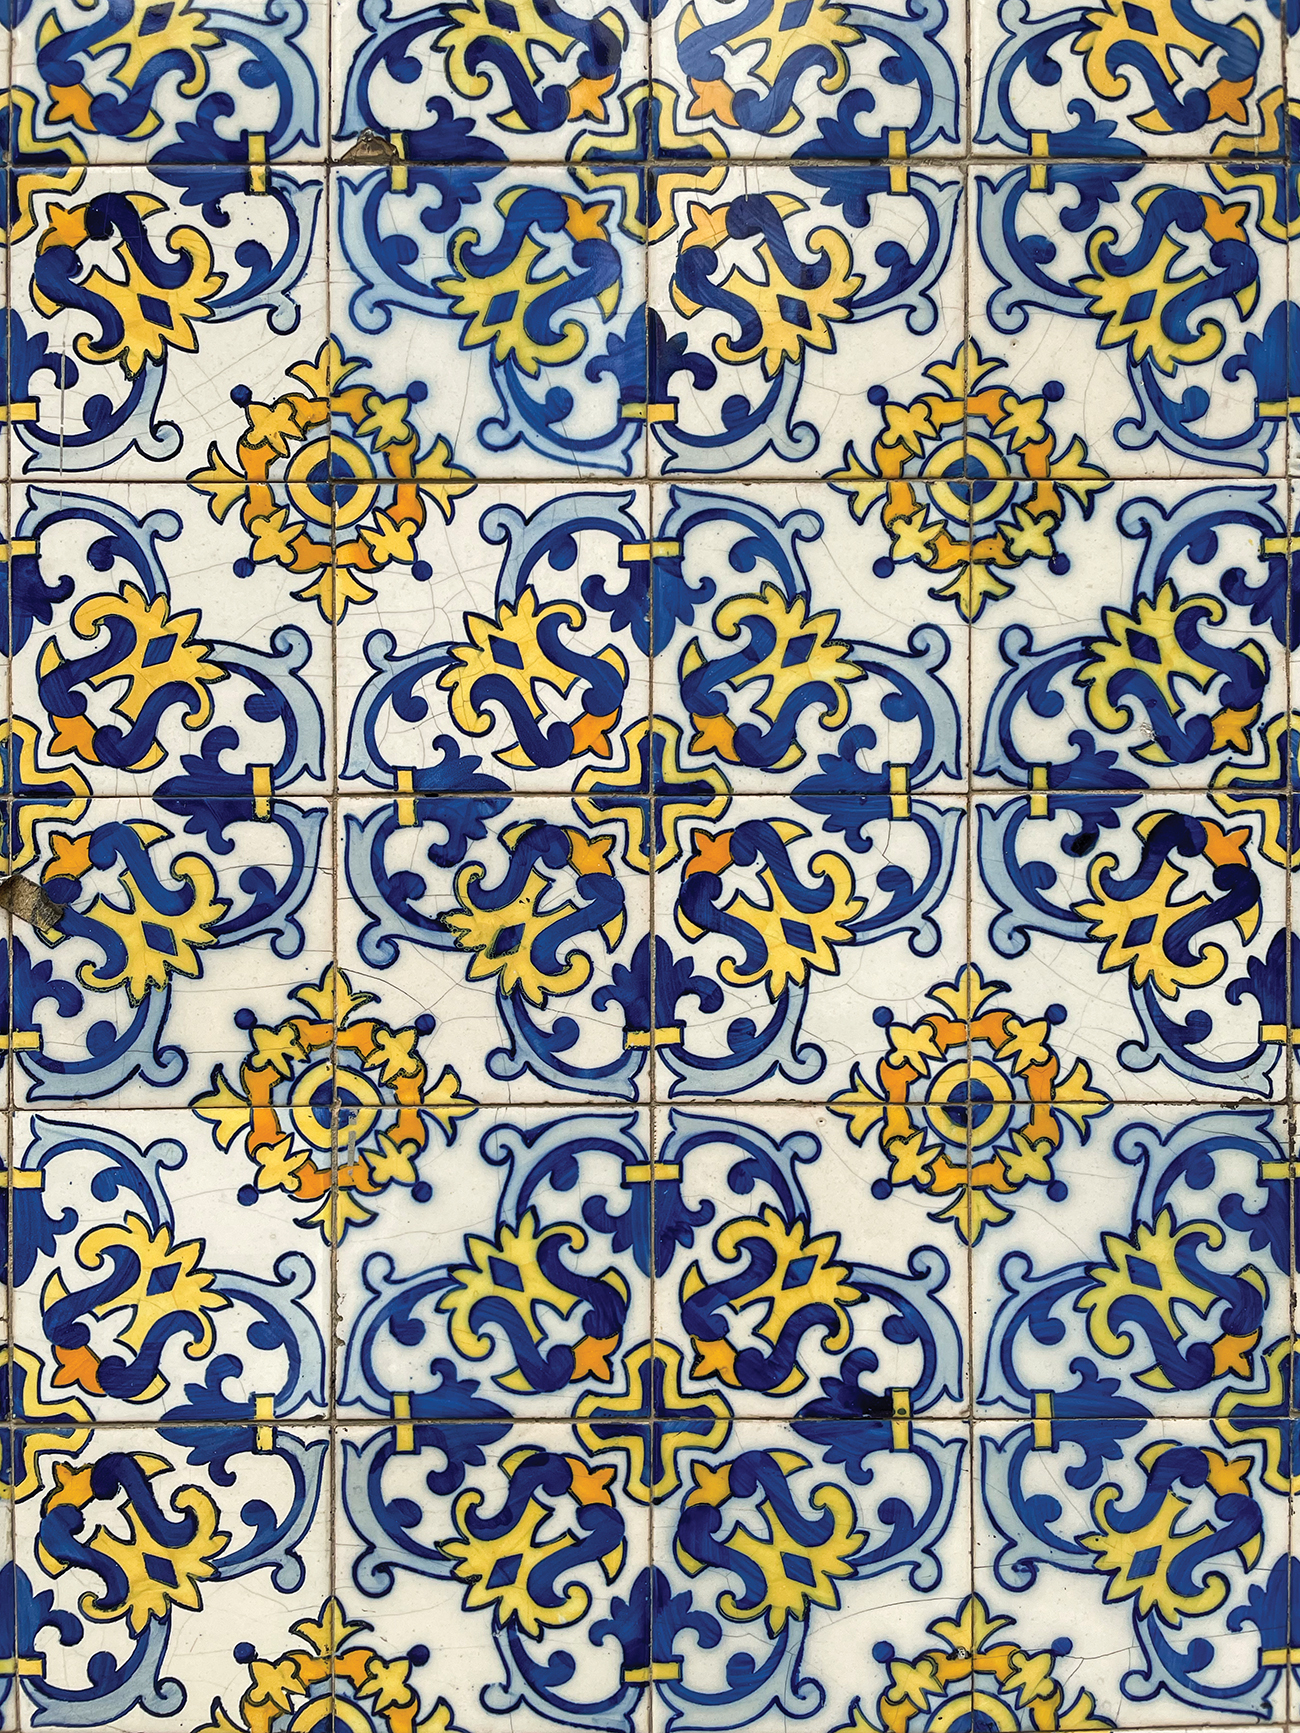 Intricate azulejos add colour and life to the façade of the Portuguese School of Macao